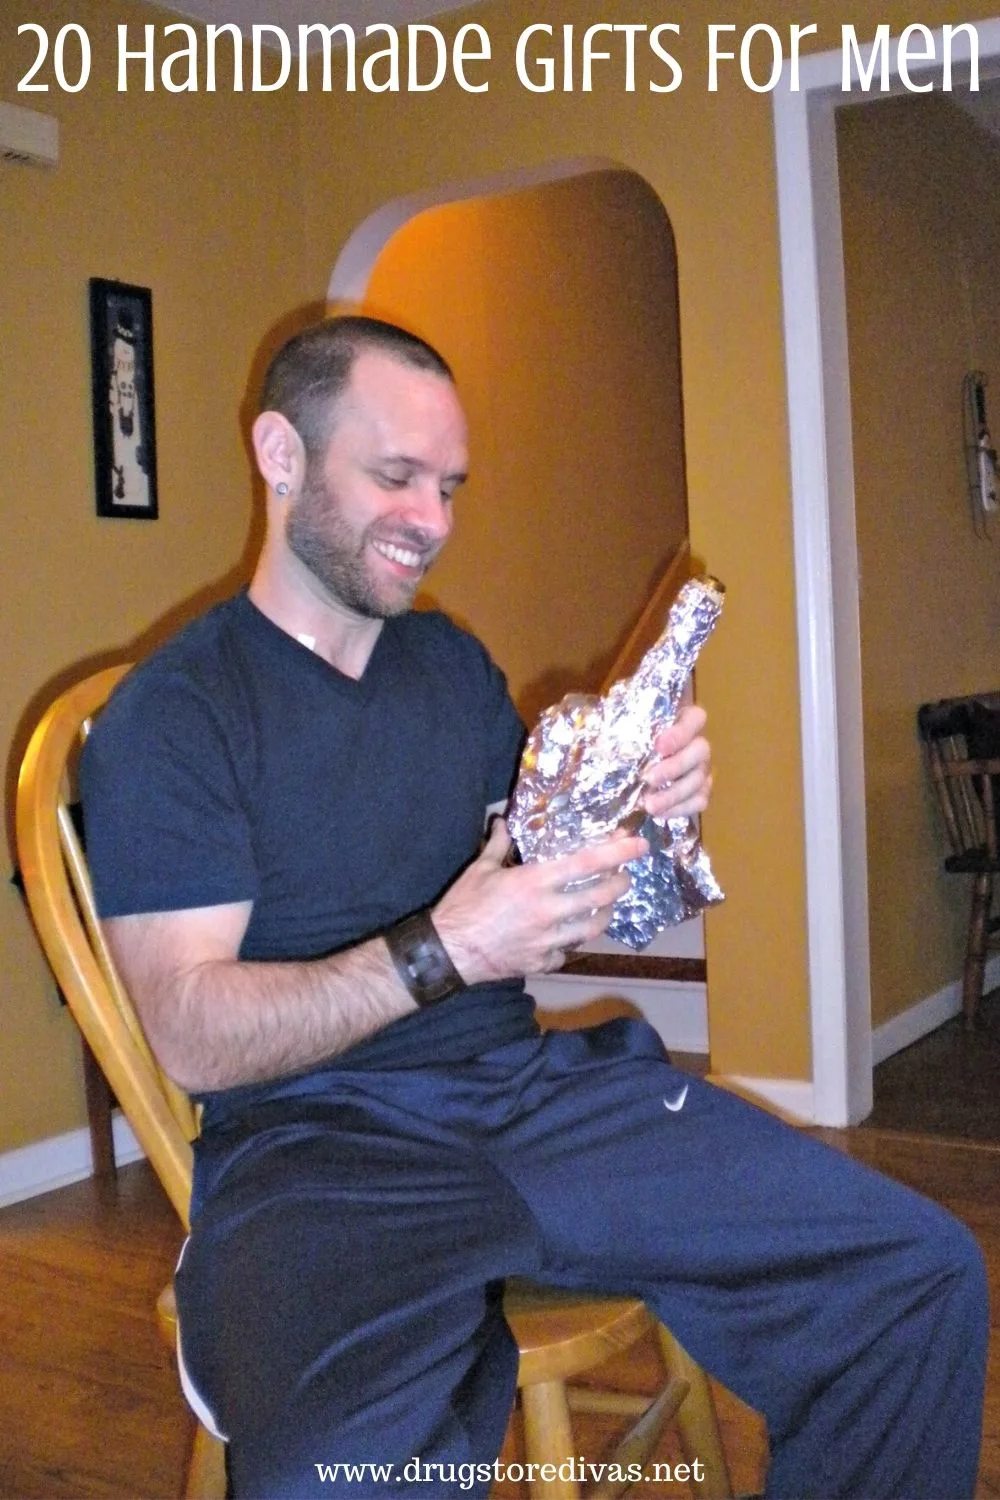 Man holding a gift wrapped in foil with the words "20 Handmade Gifts For Men" digitally written on top.